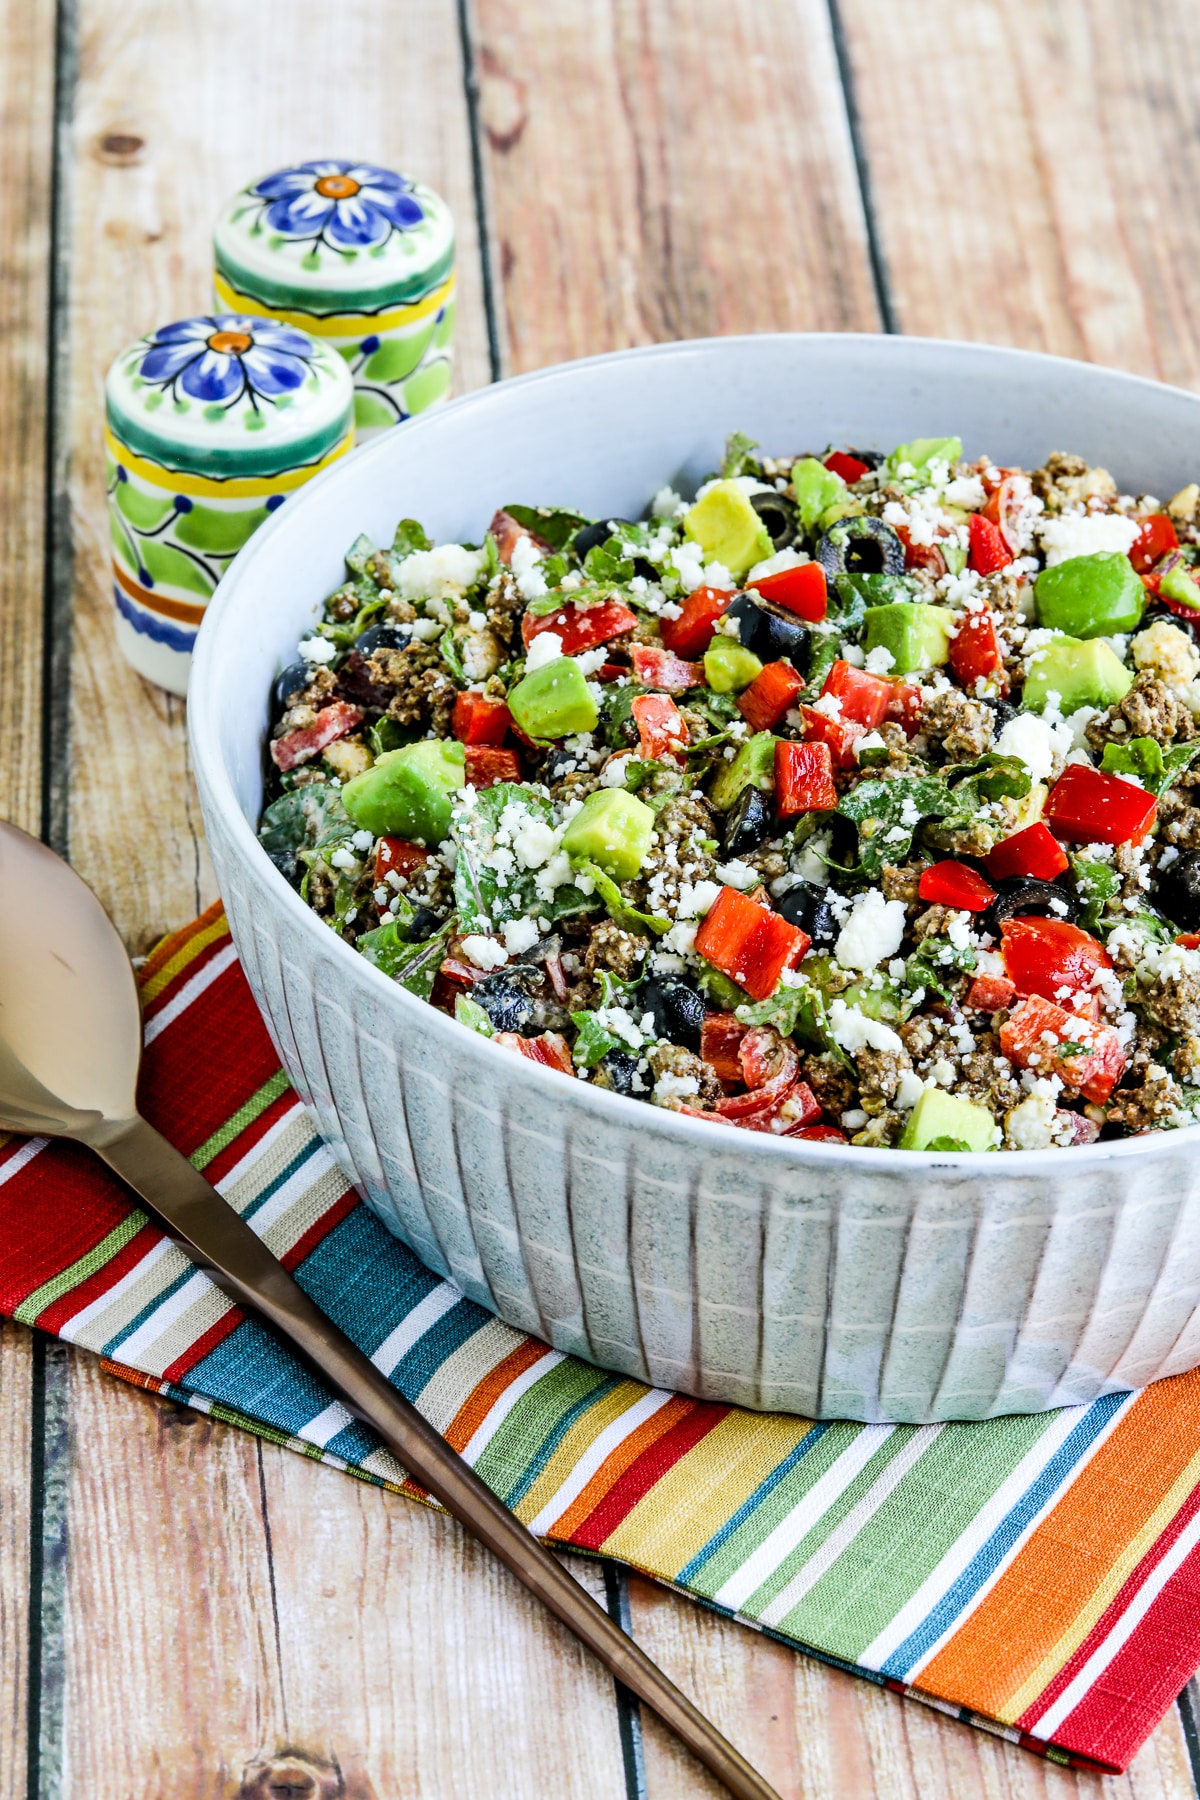 Ground Beef Taco Salad with Kale, Tomatoes, and Avocado shown in serving bowl.